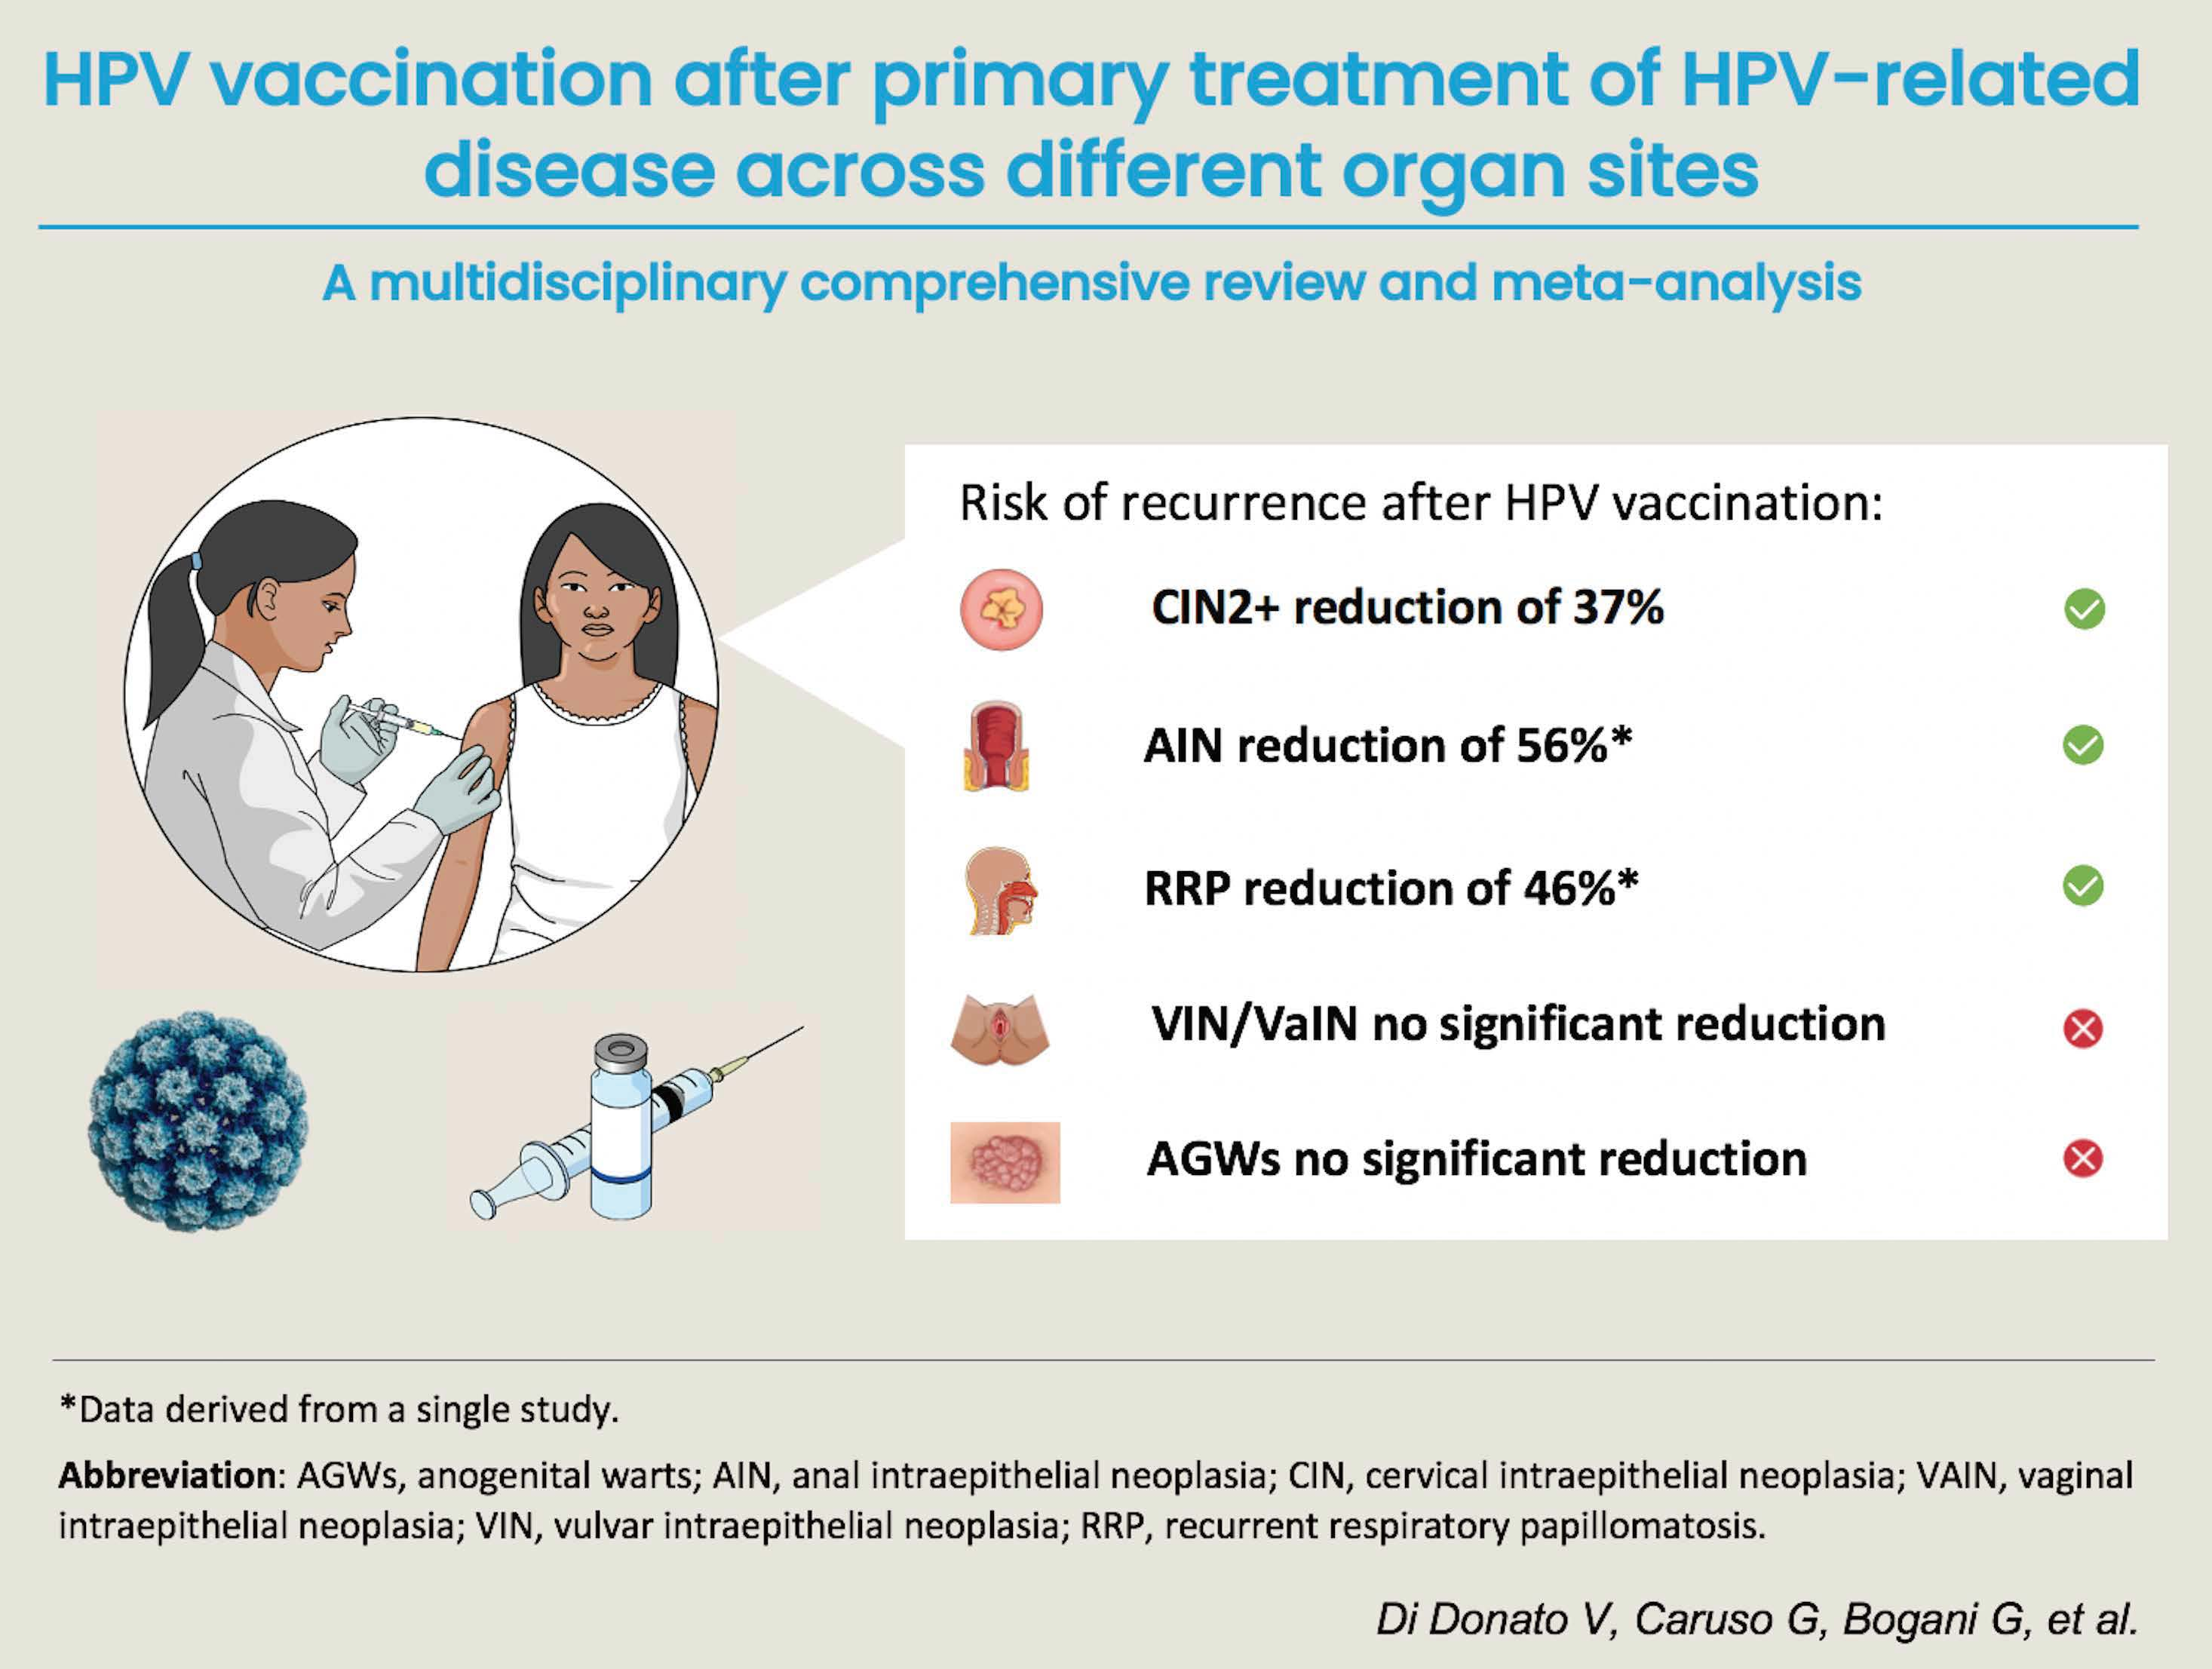 Attitudes regarding importance of HPV vaccine to Tdap and MCV4 vaccines